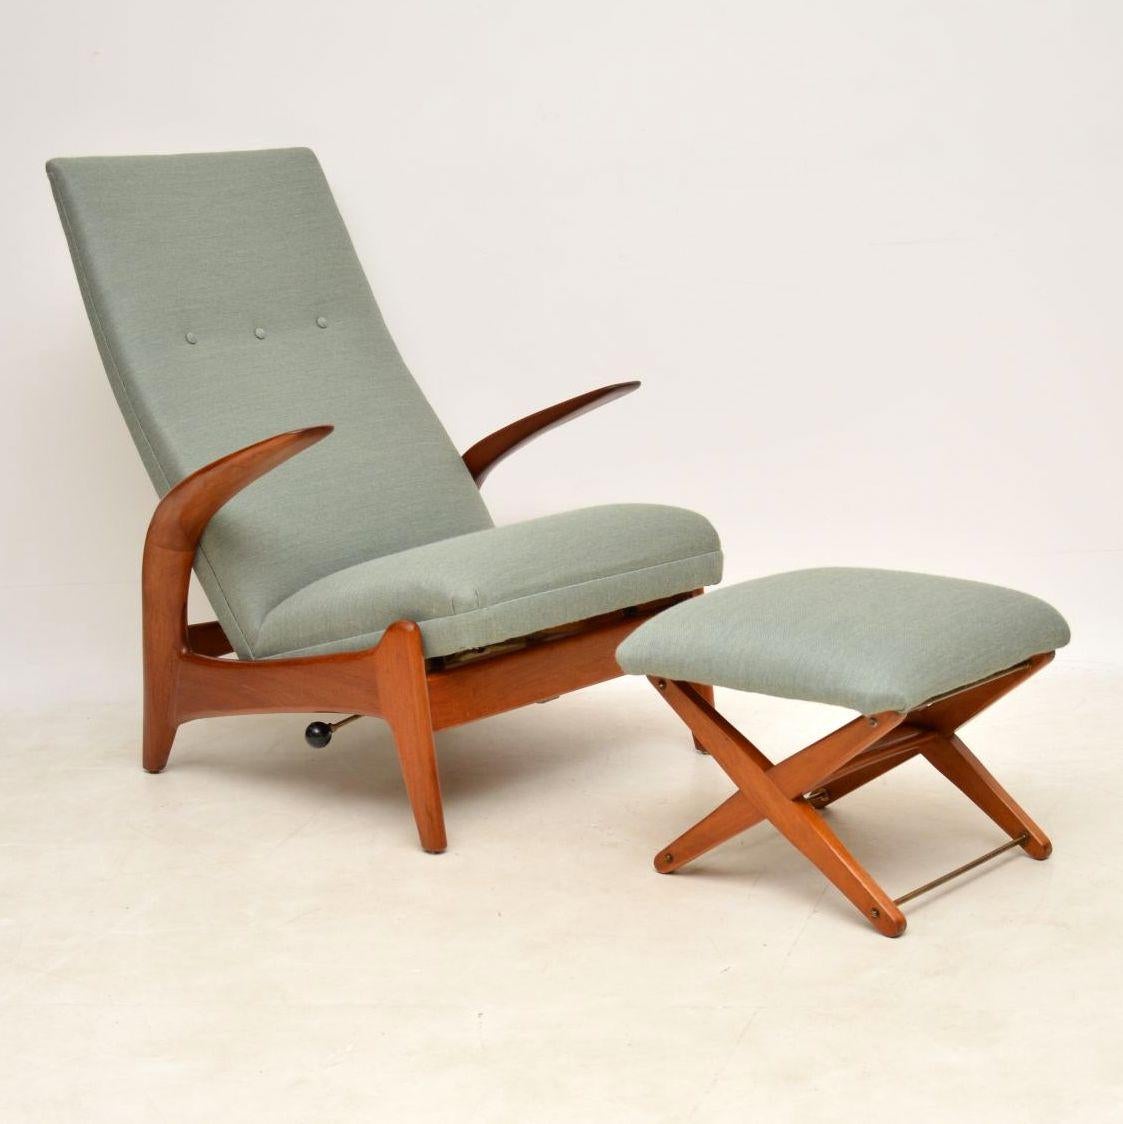 Probably the most comfortable reclining armchair you could ever find, this is a fine and rare example of a “Rock ‘n’ Rest” armchair with matching stool. These were designed by Rastad & Relling and made by Gimson & Slater in the 1960s. You won’t find